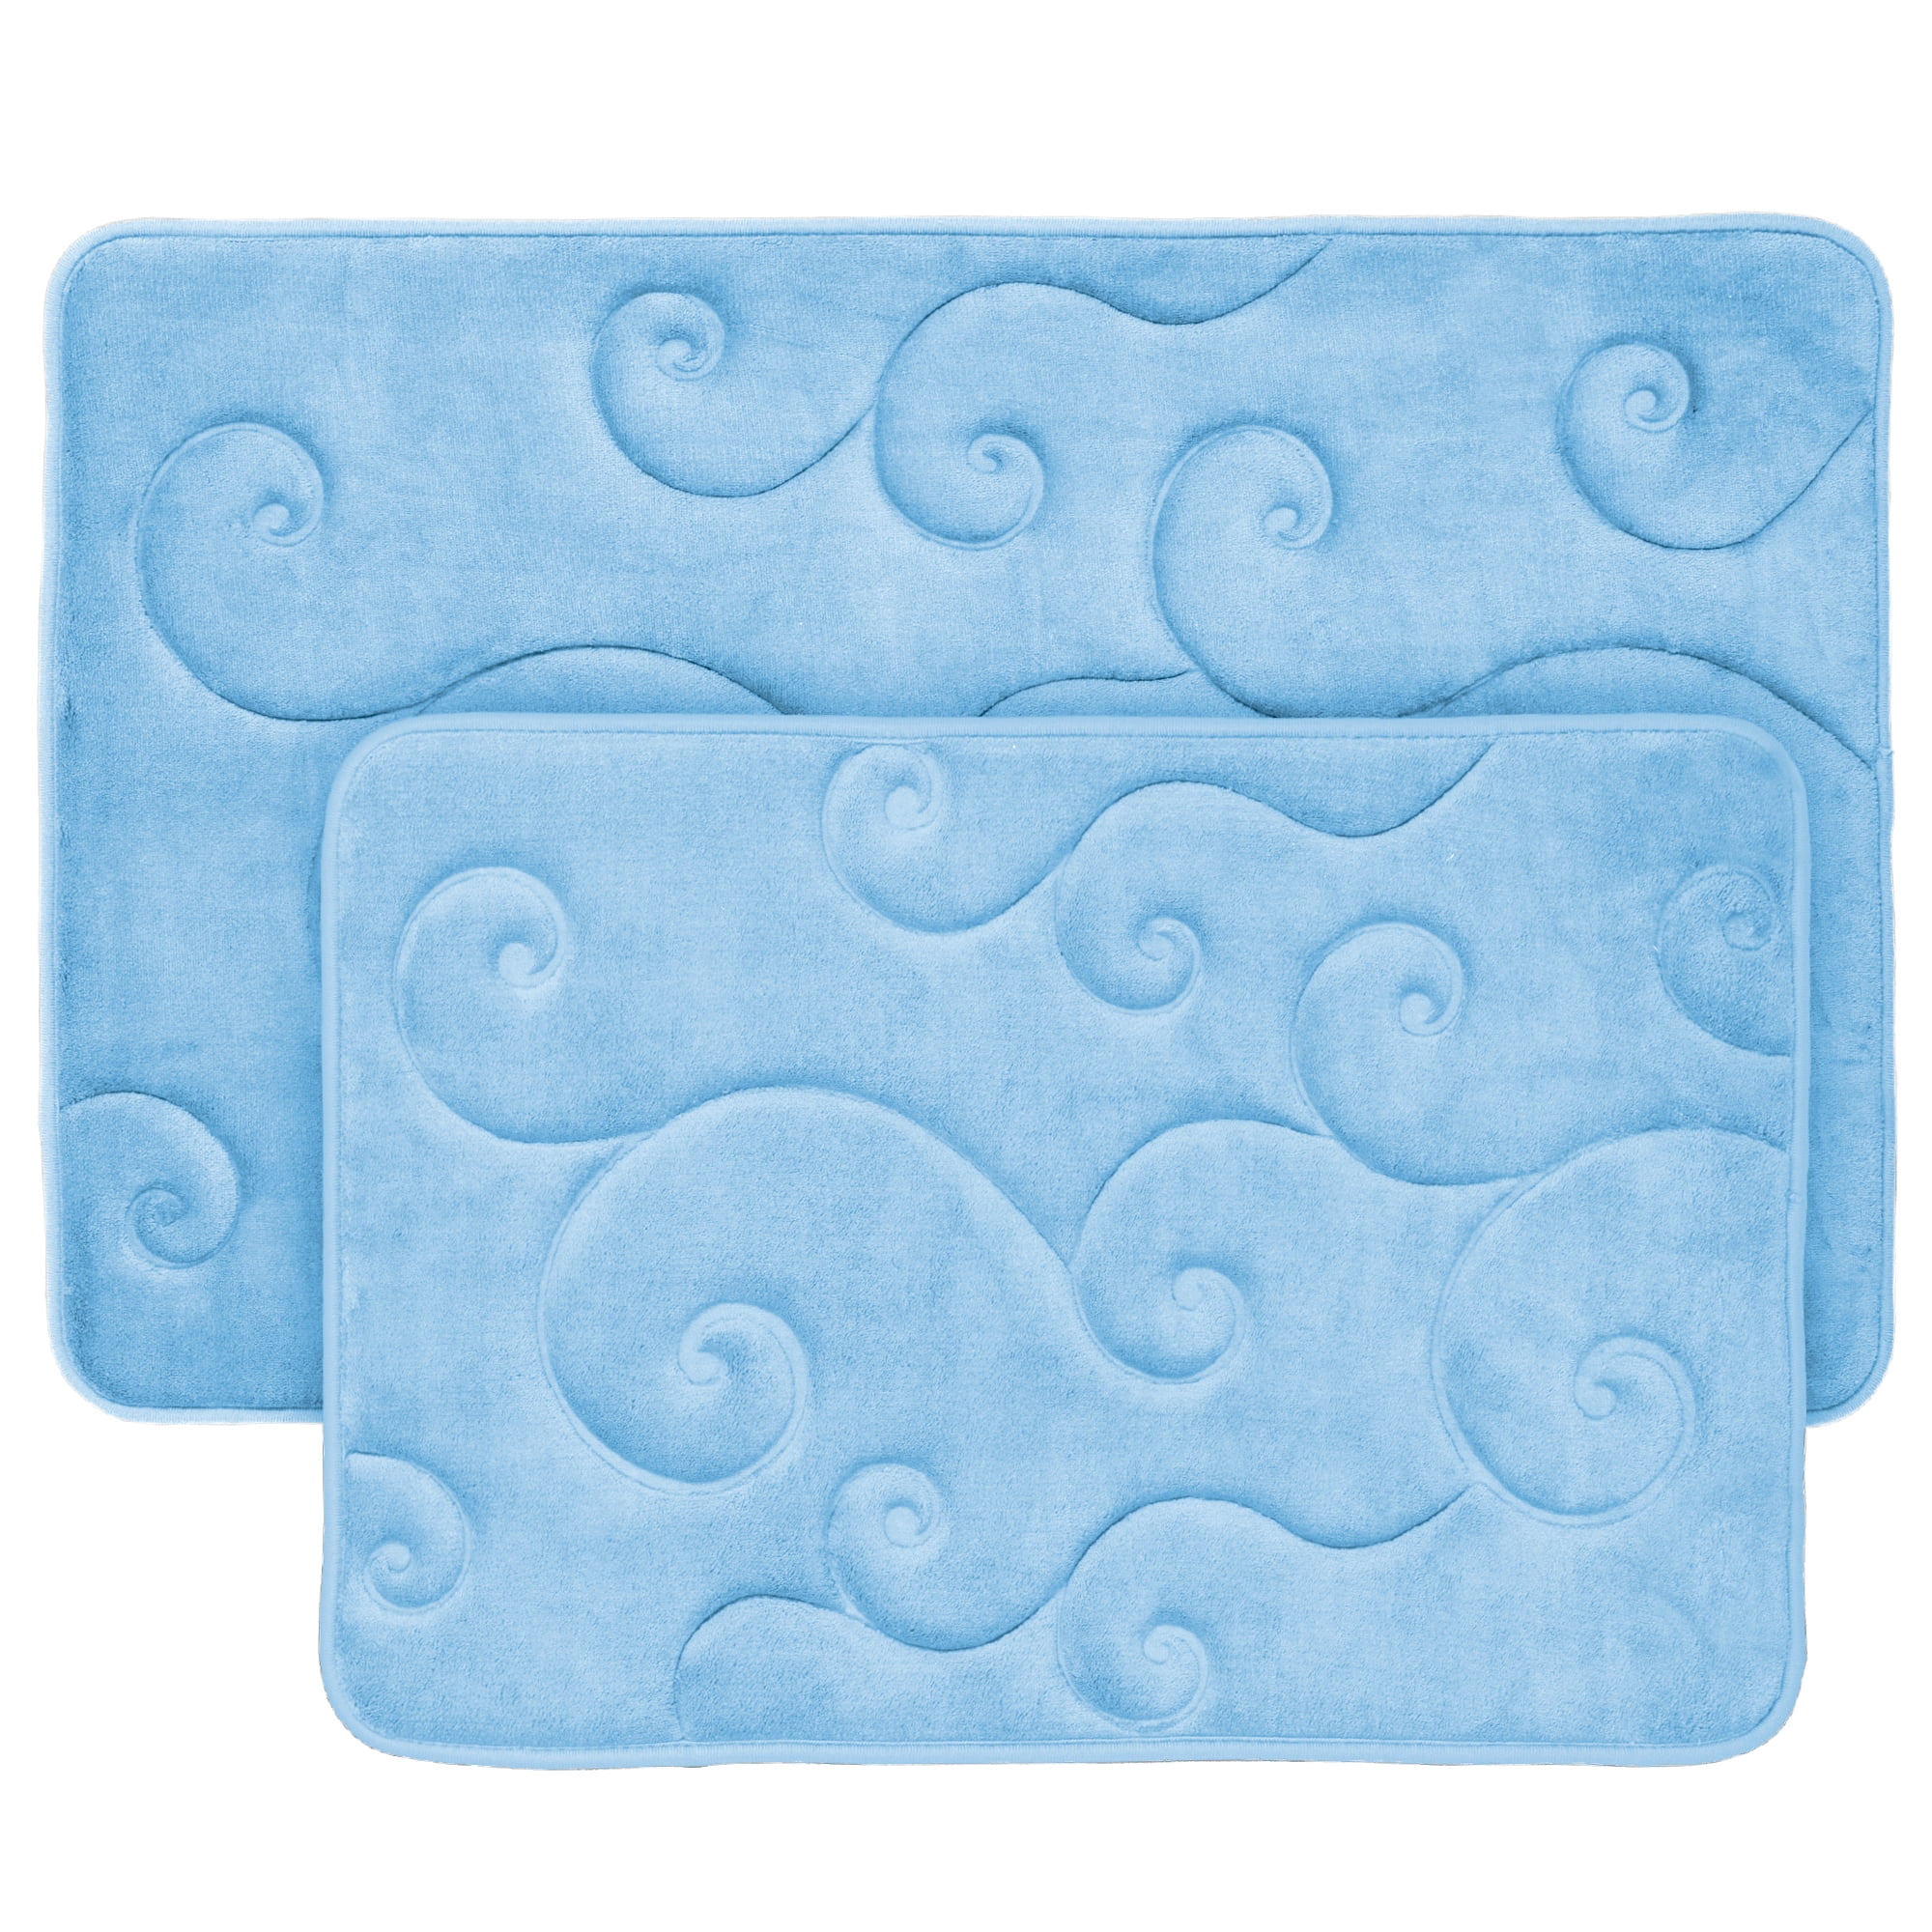 Microfiber Memory Foam Bath Mat - Oversized Padded Nonslip Accent Rug with  Wave Pattern for Bathroom, Kitchen, and Laundry Room by Lavish Home (Blue)